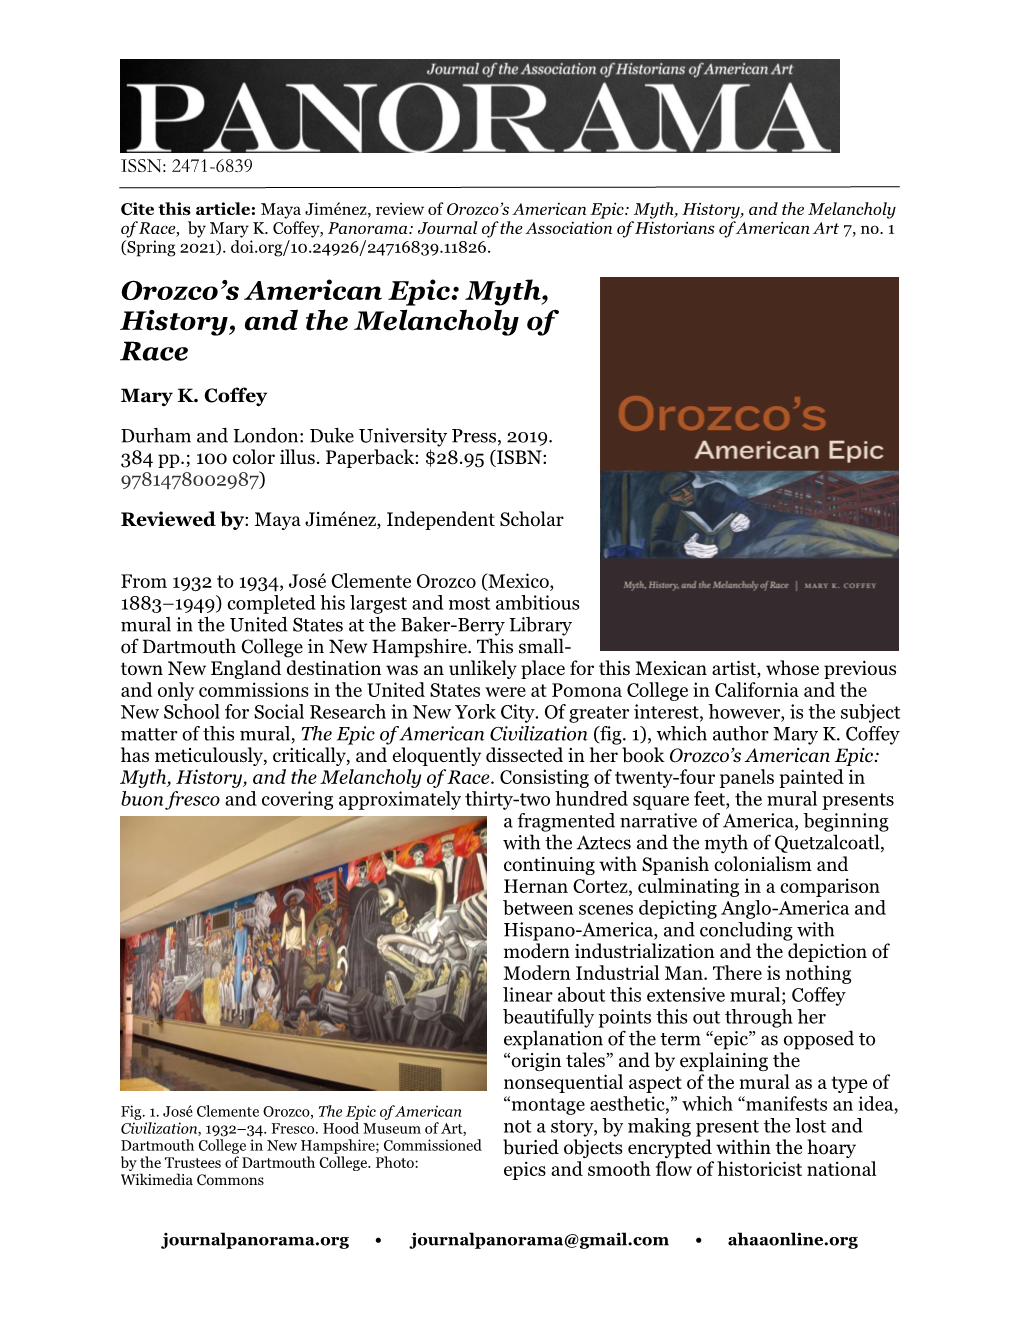 Orozco's American Epic: Myth, History, and the Melancholy of Race